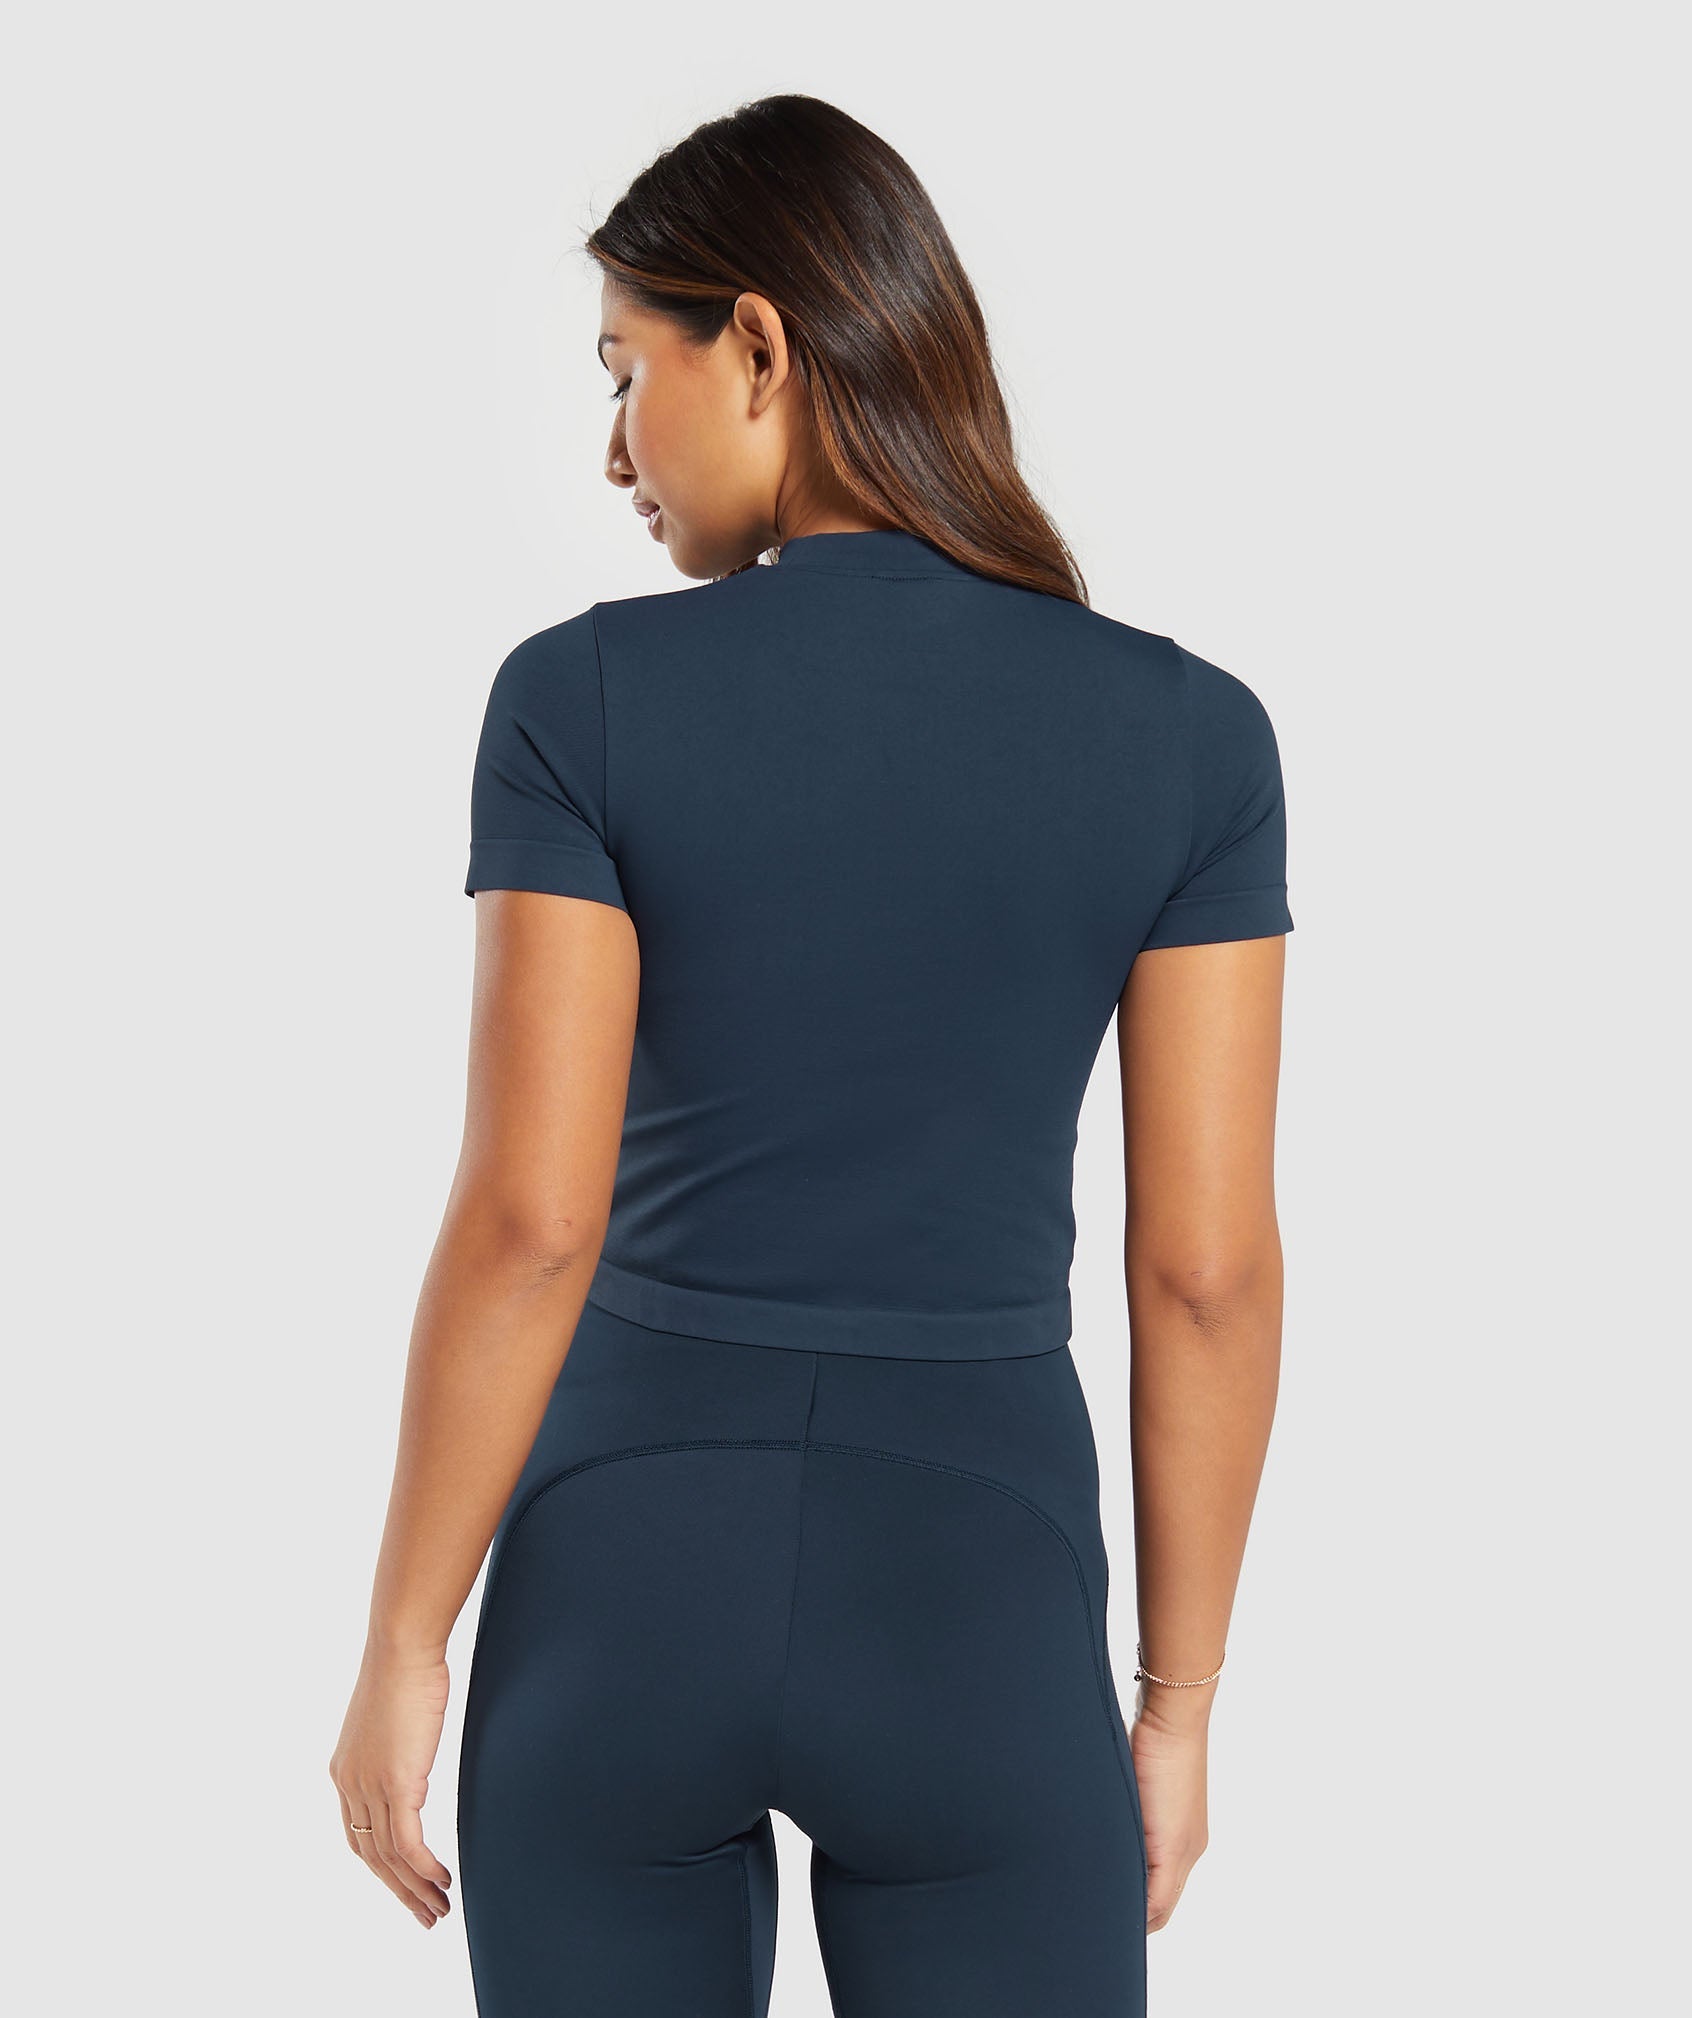 Everyday Seamless Tight Fit Tee in Navy - view 2